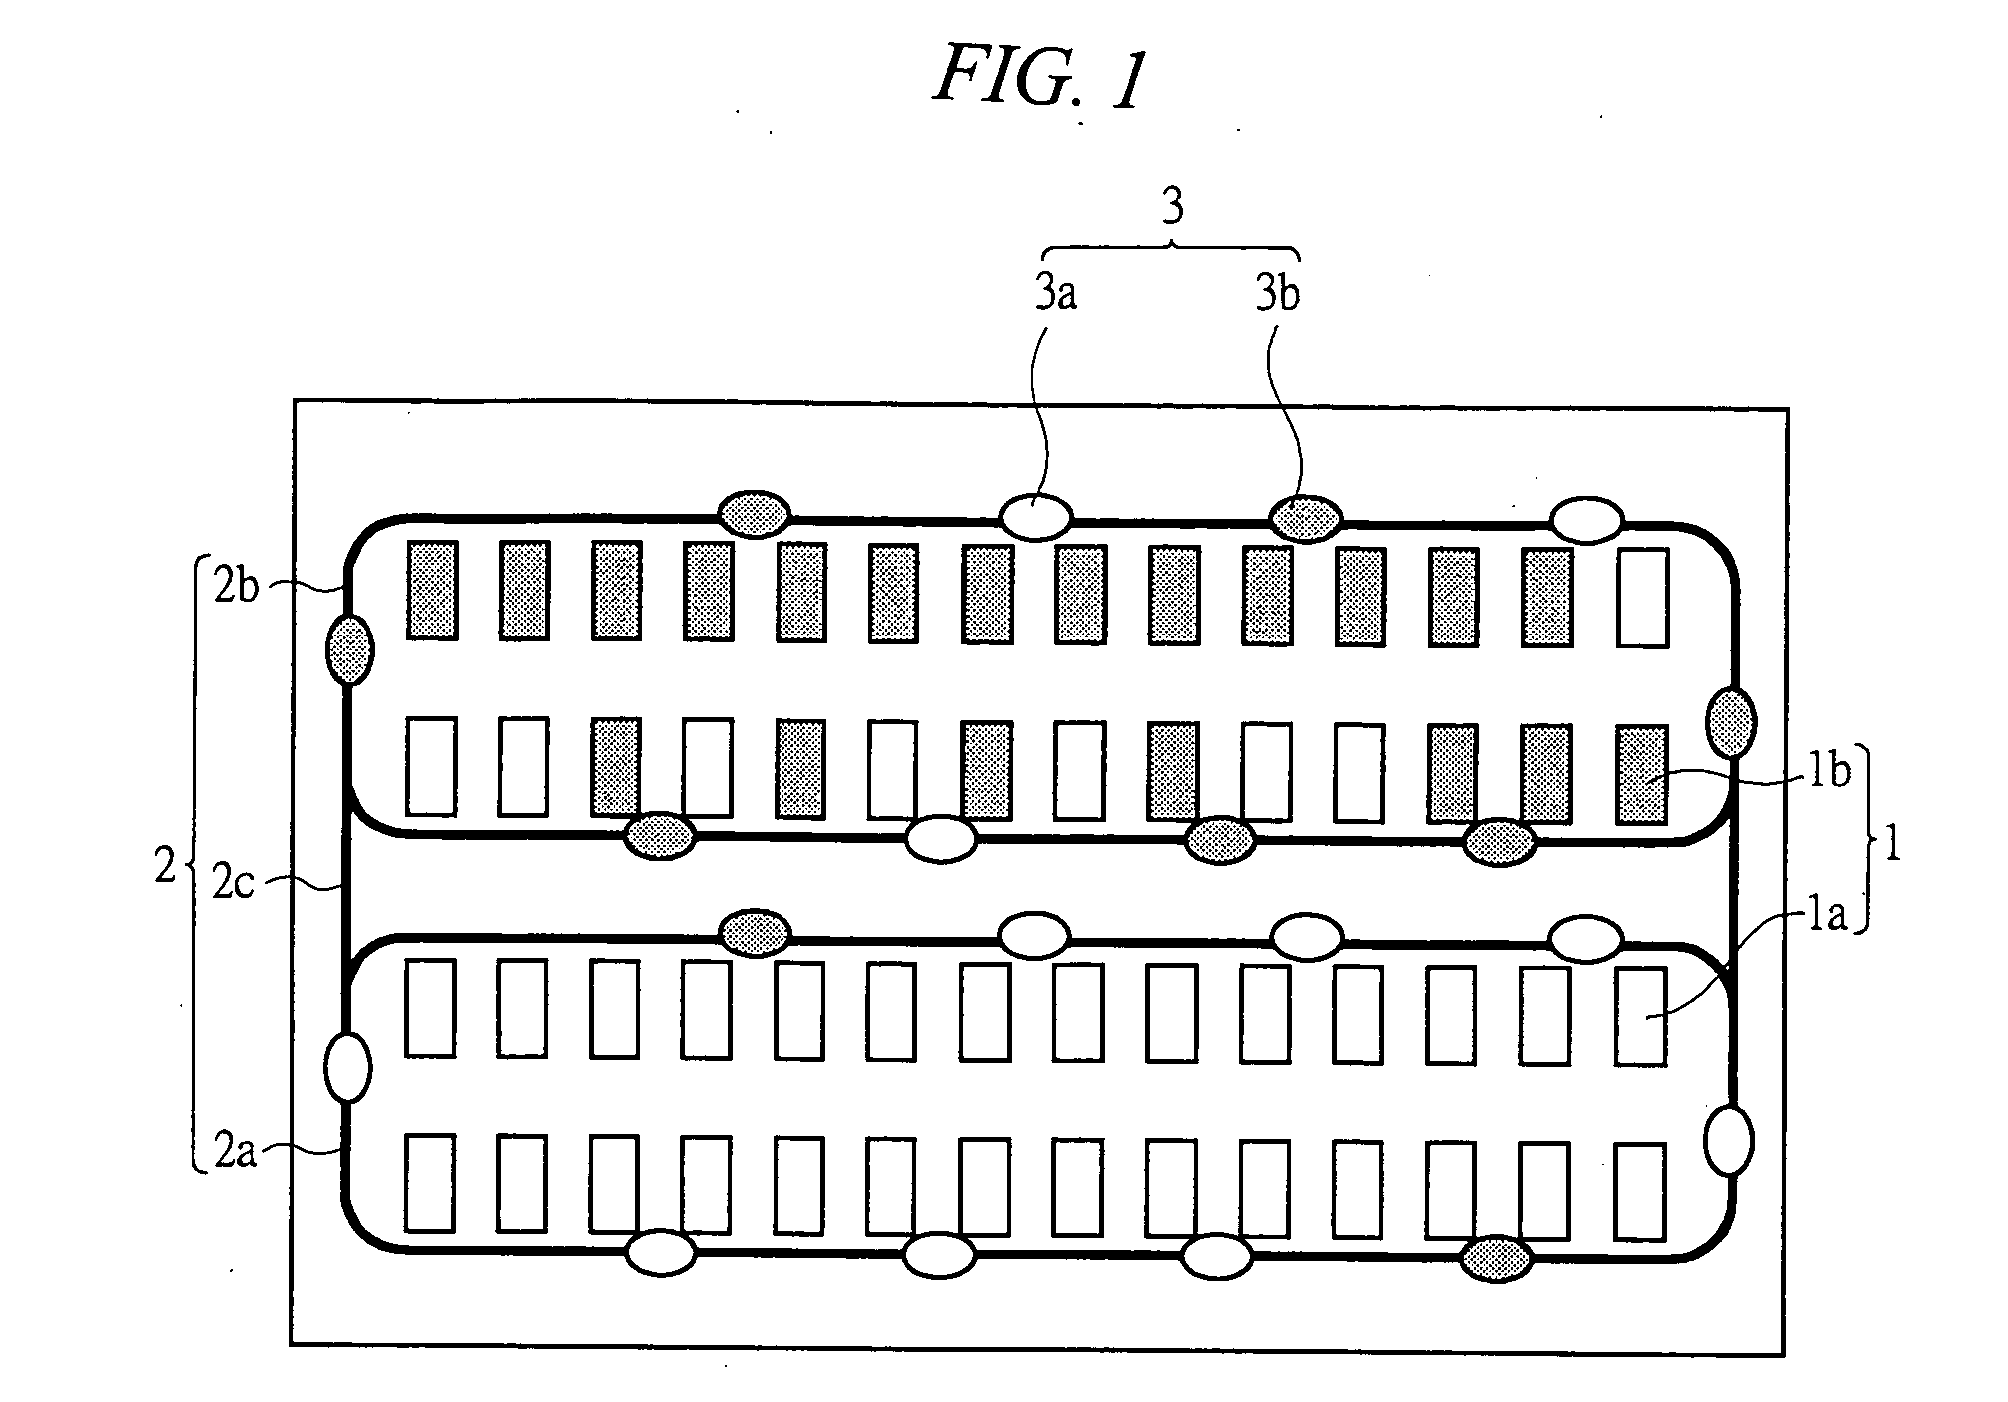 Transfer system and semiconductor manufacturing system